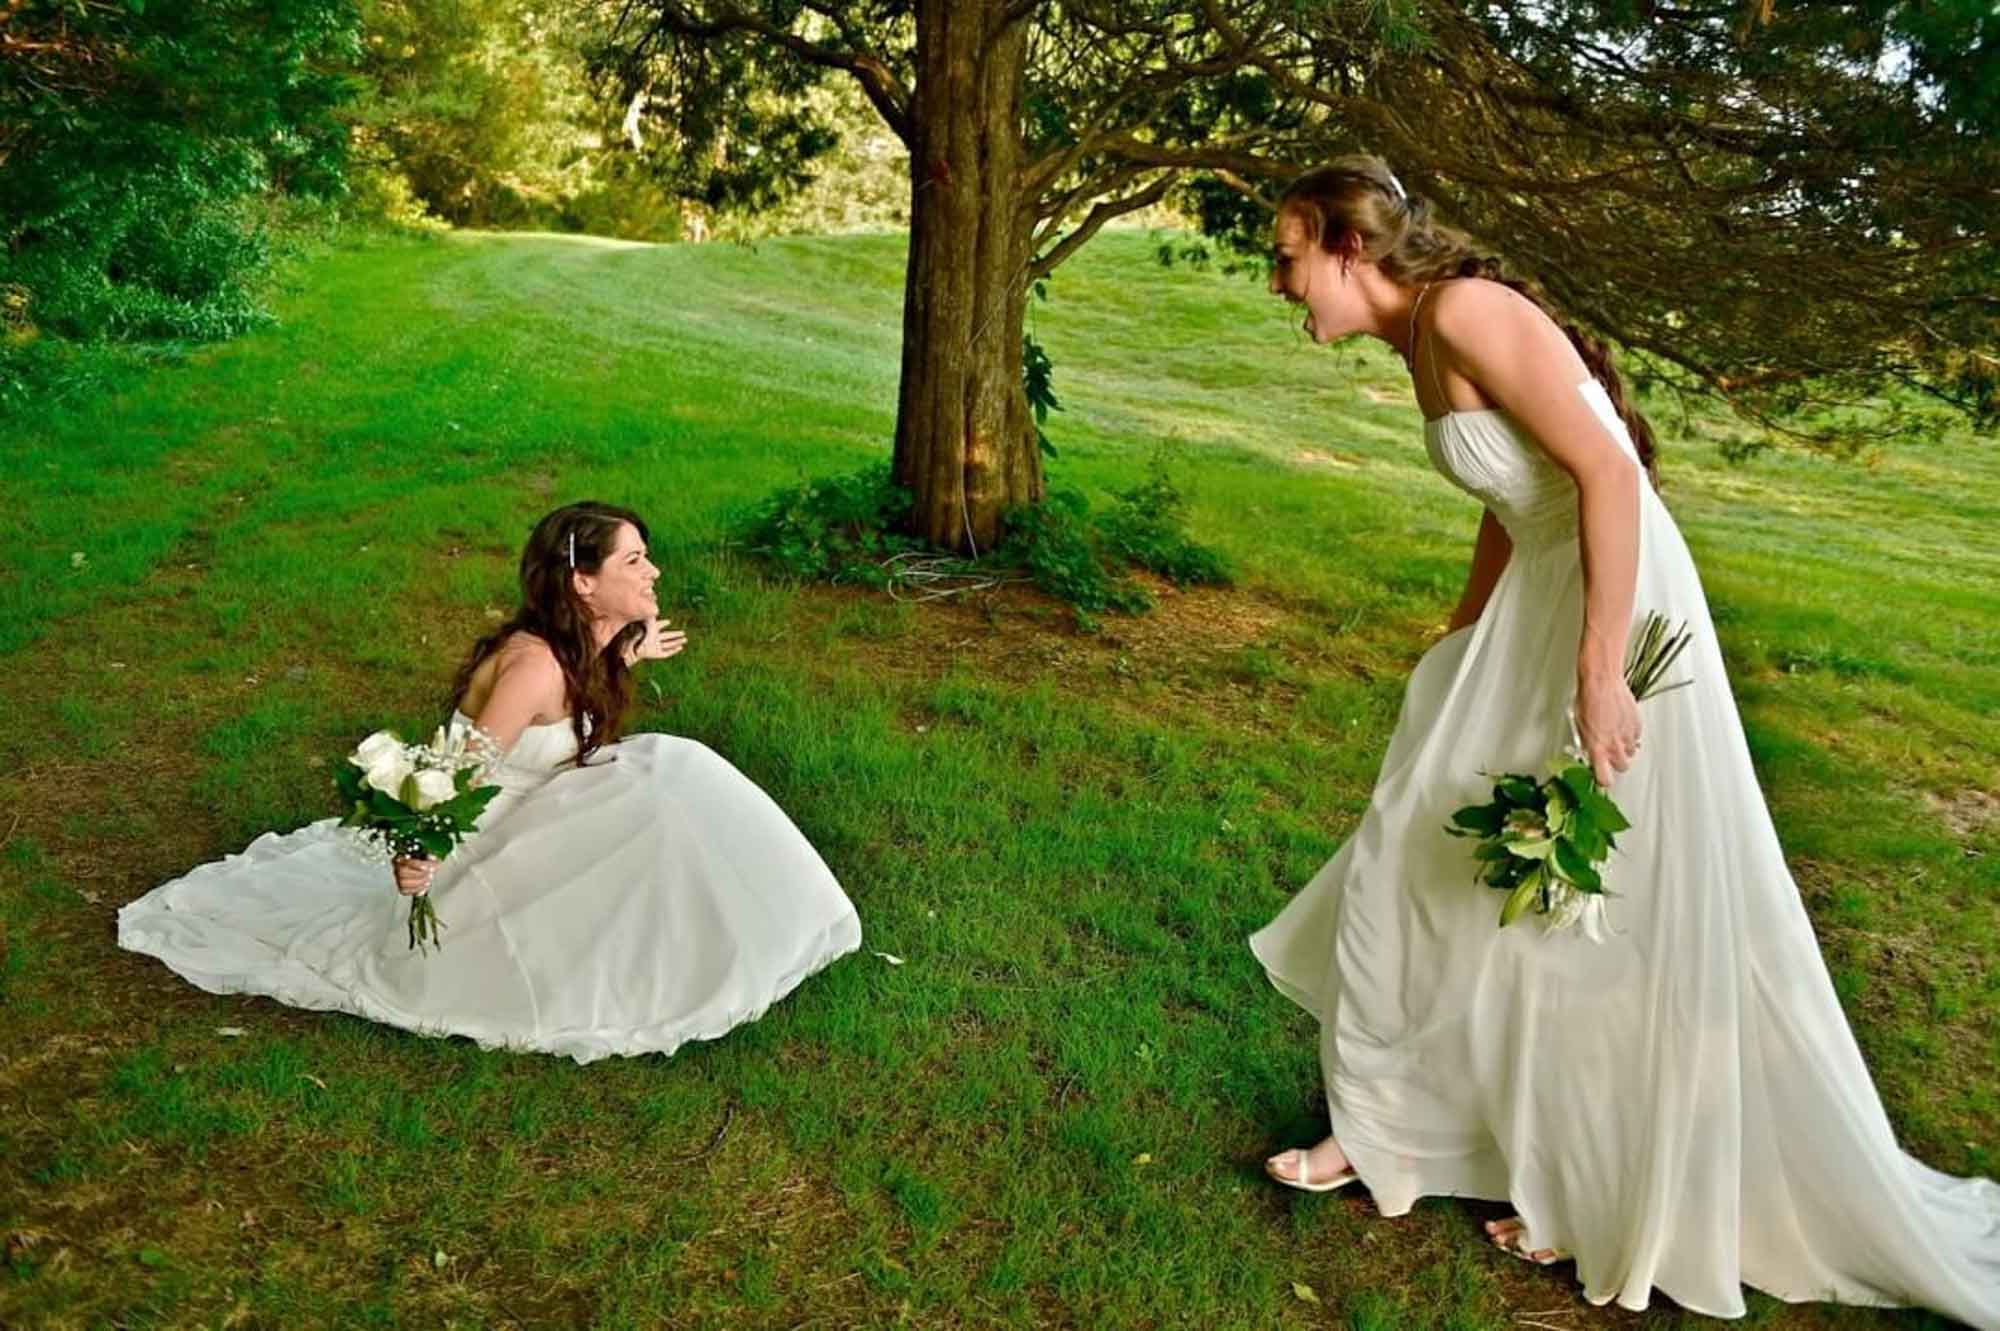 Lesbian brides accidentally wore the same dress and the first look photos are priceless